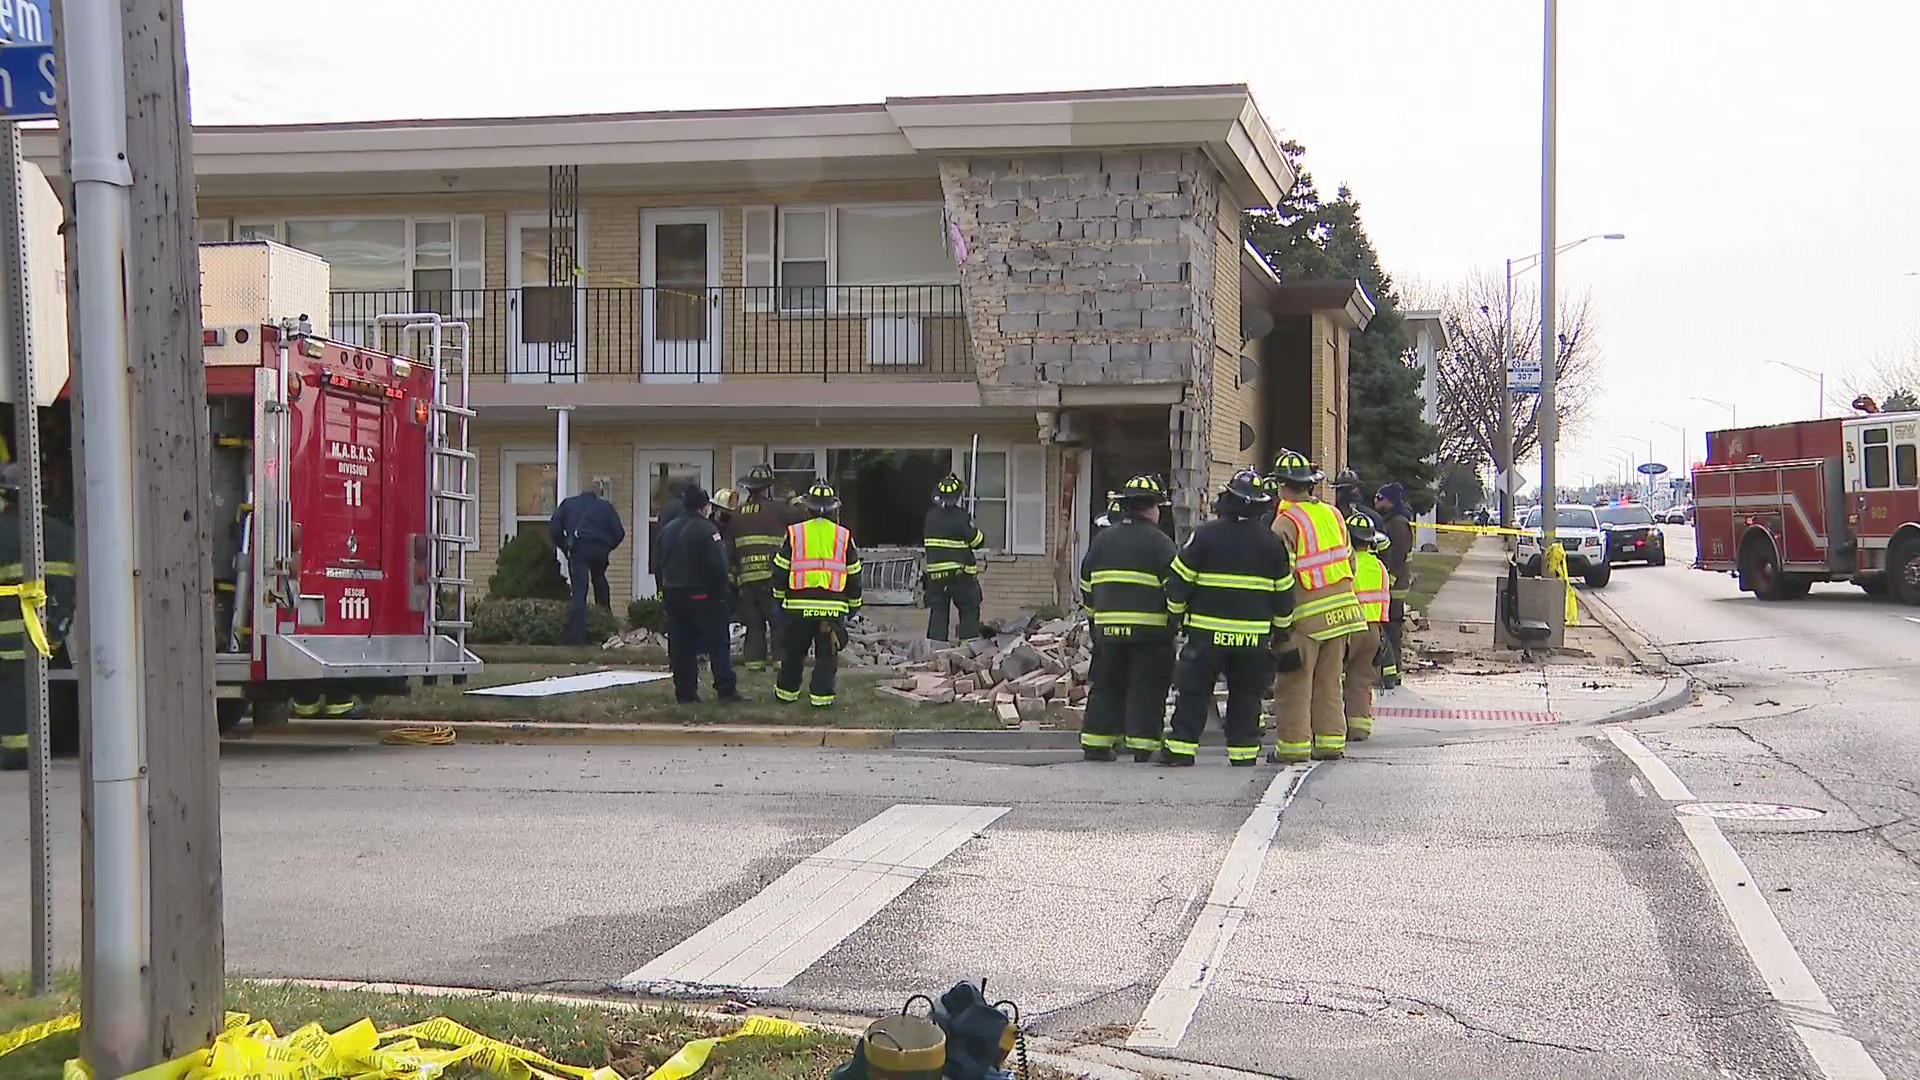 7 Families Displaced, 2 People Injured After Crashing Into Multi-Unit Building In Berwyn